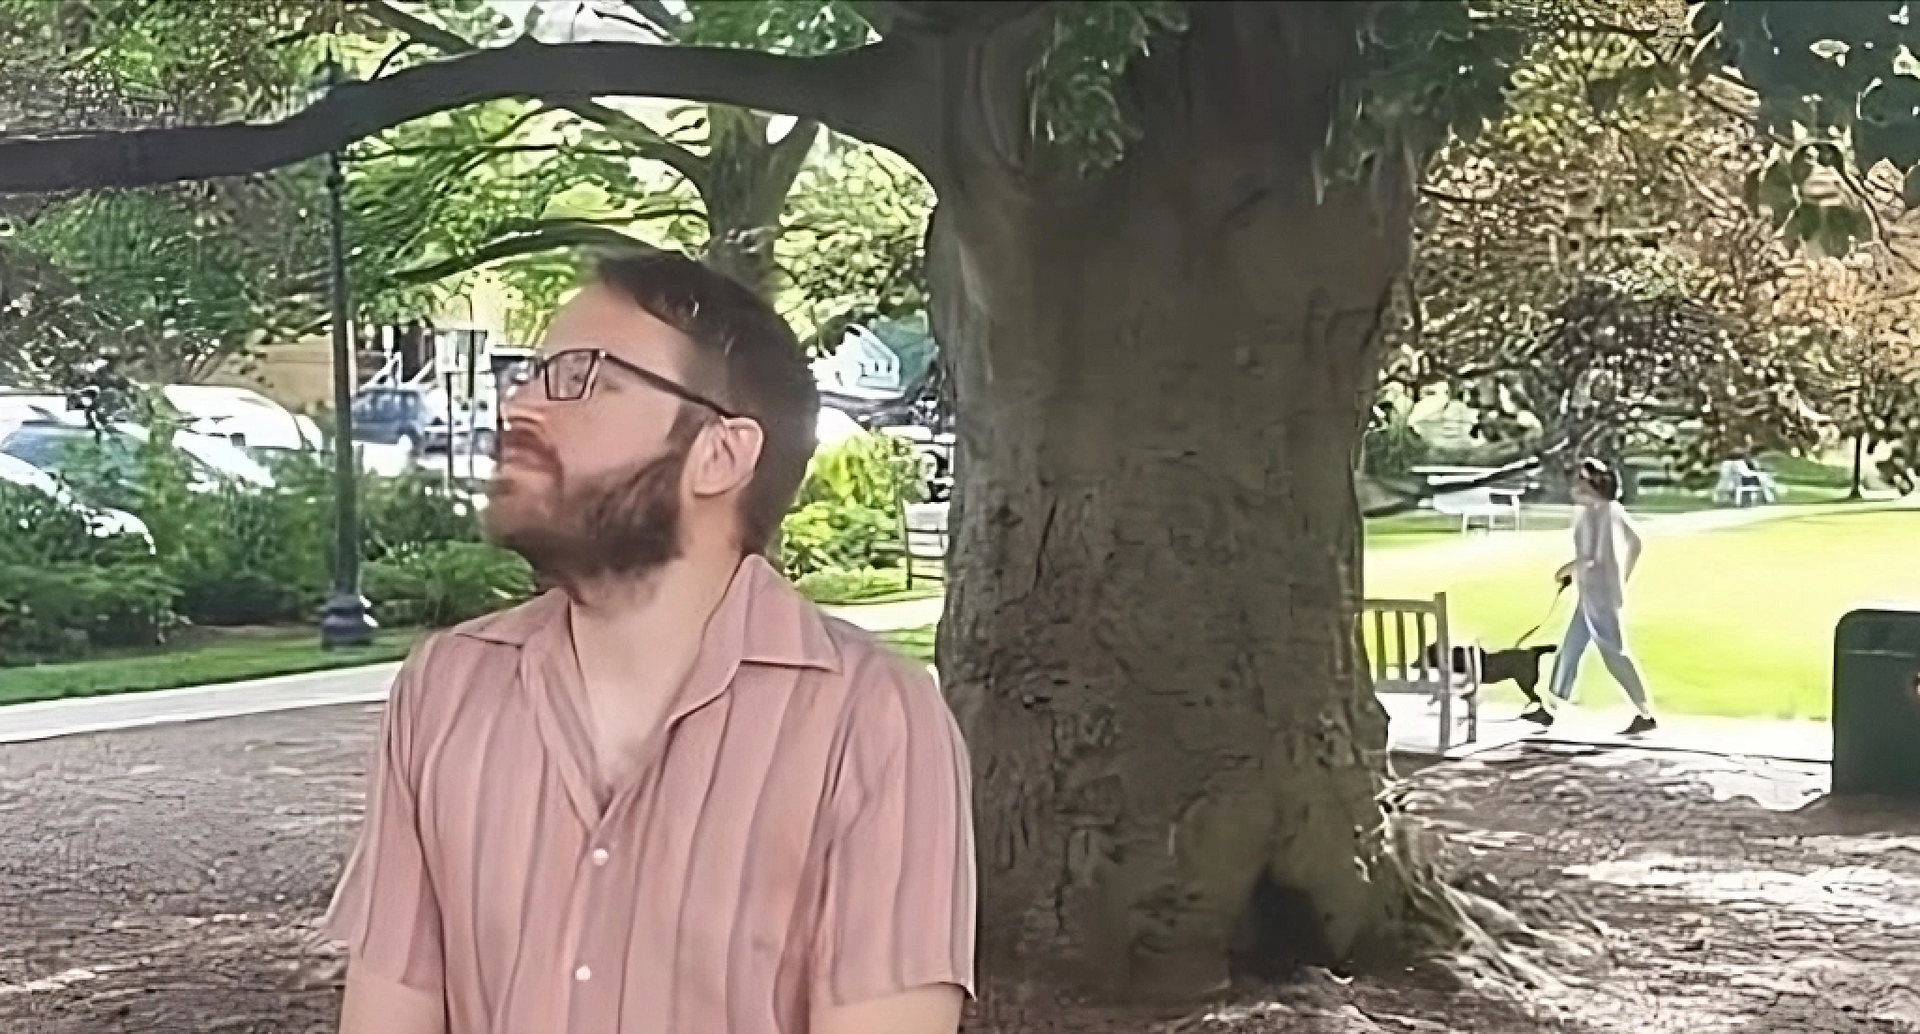 A man with glasses is standing next to a tree in a park.